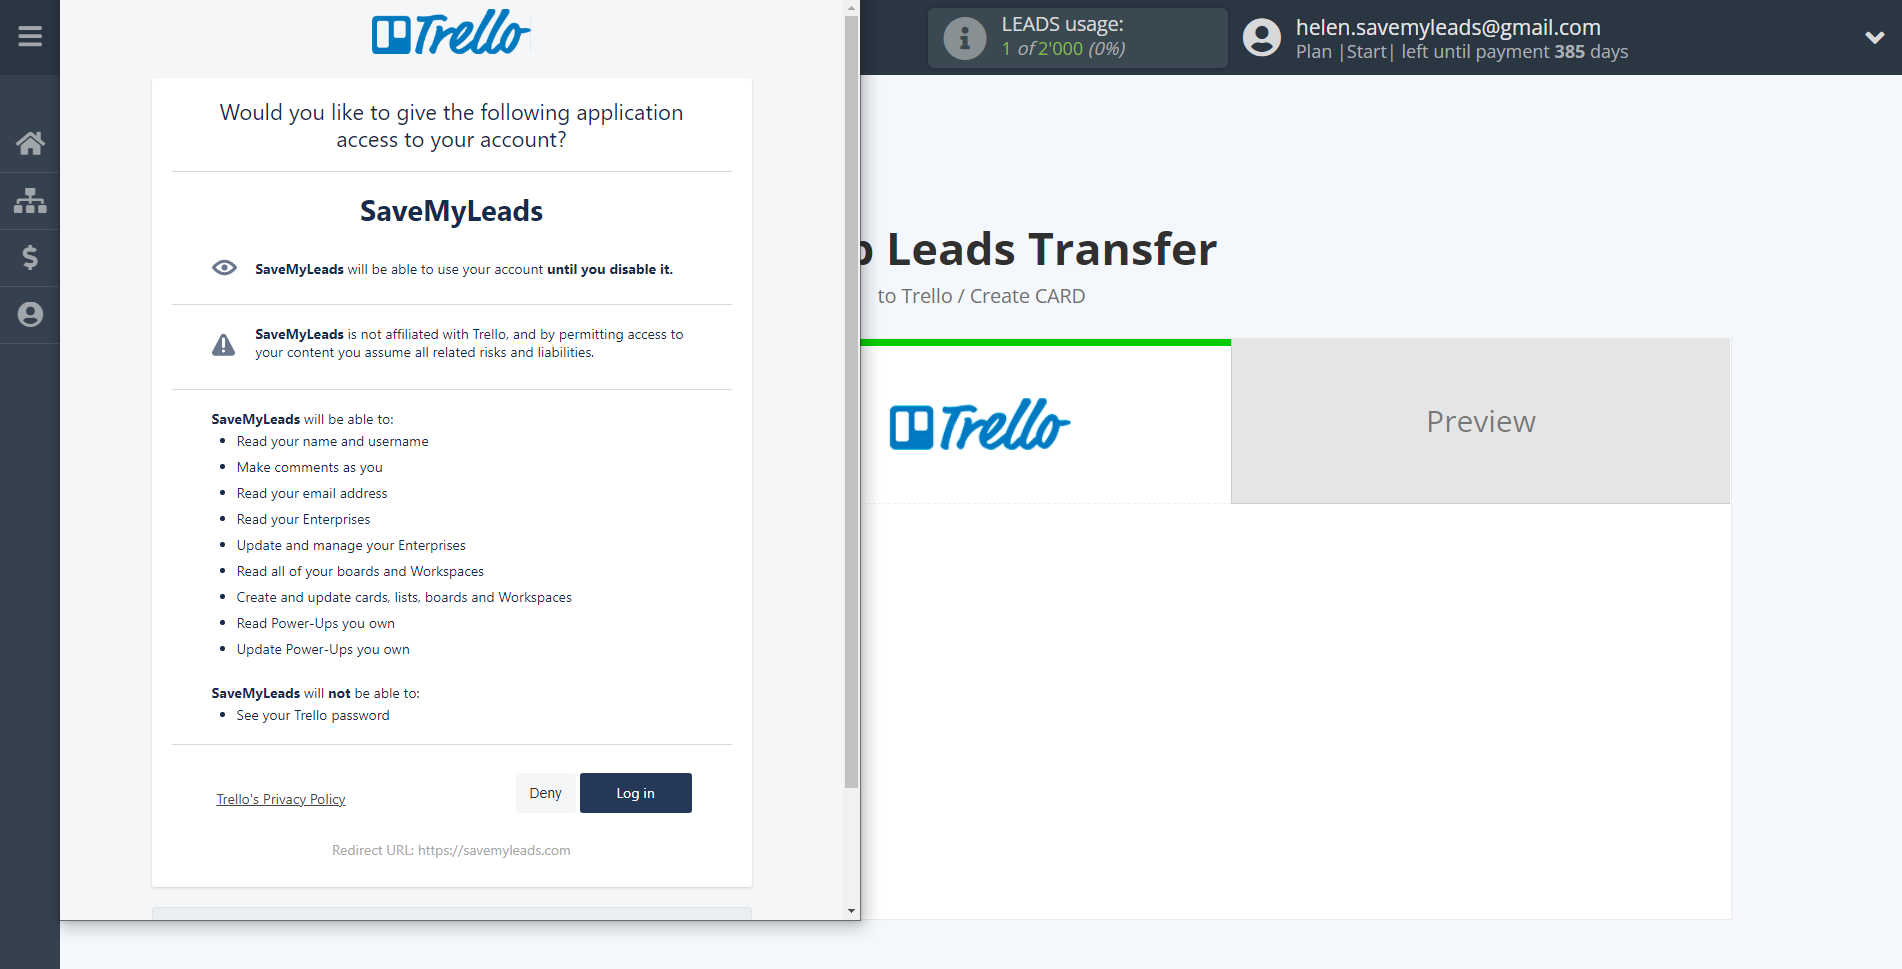 How to Connect Google Lead Form with Trello | Data Destination account connection